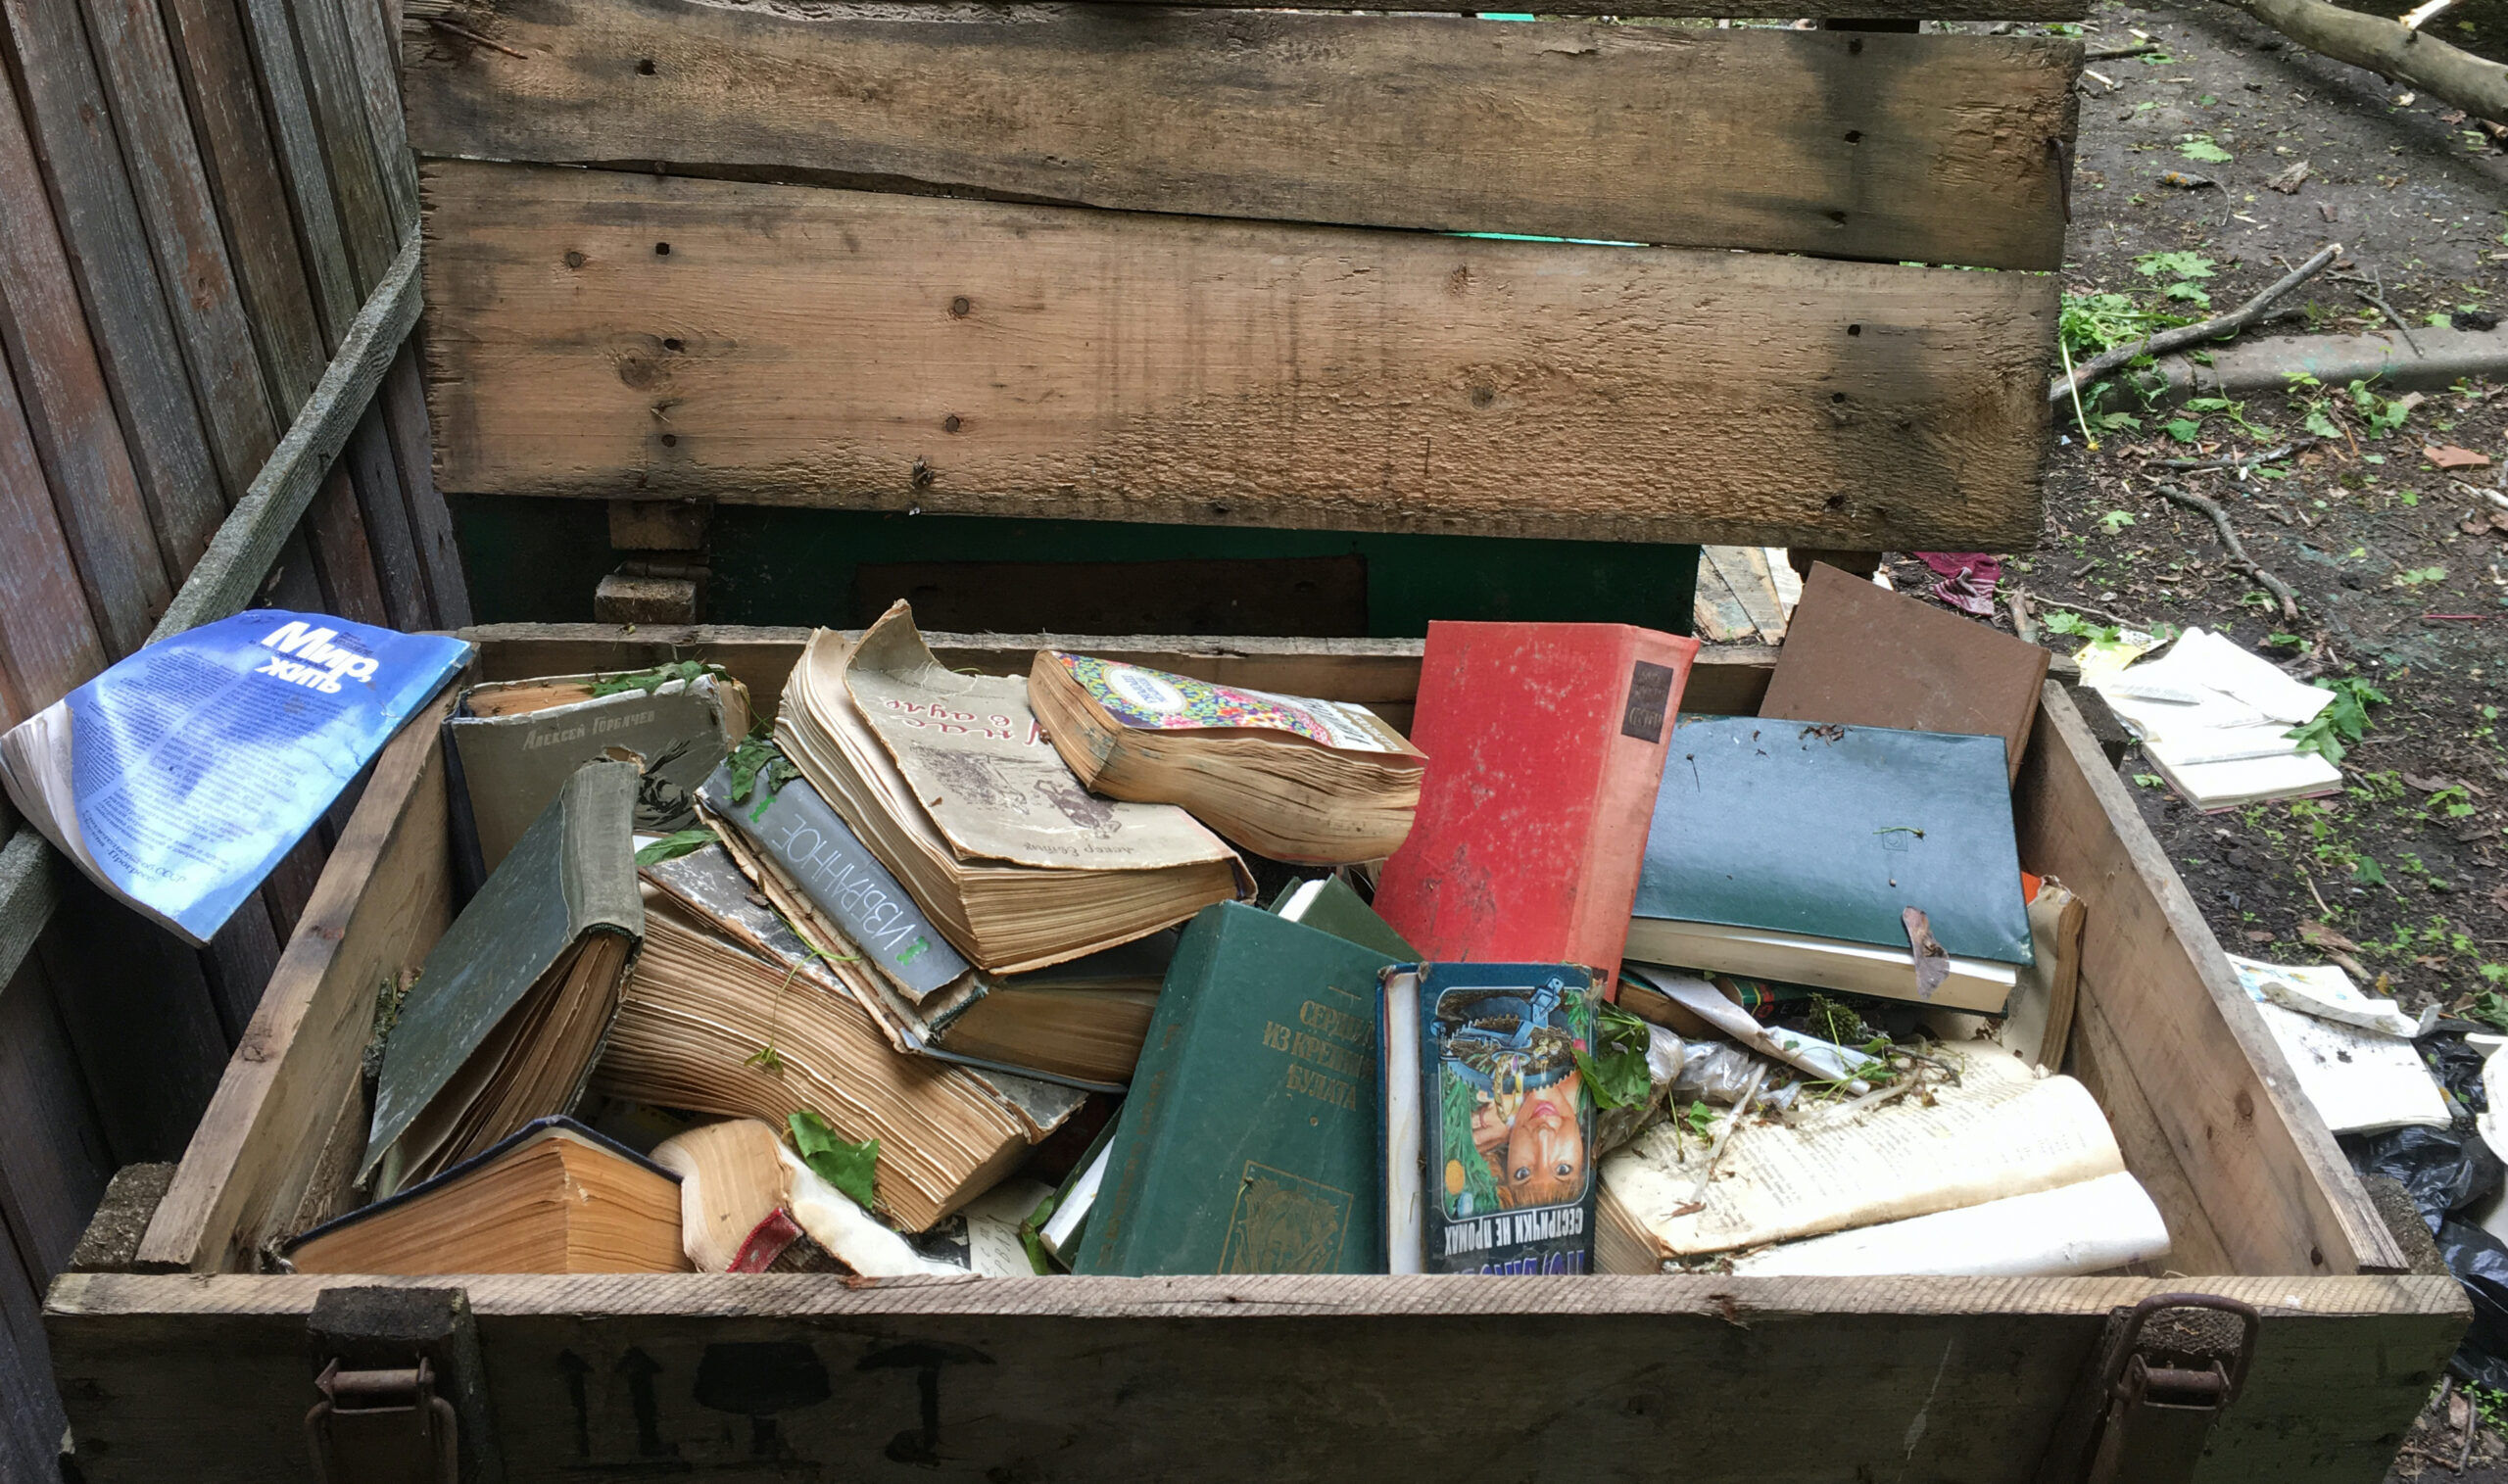 alabama-books-dumpster-lgbtq-woke-education-schools-scaled Moscow,,Russia,-,June,4,,2017:,Abandoned,Books,Dumped,In